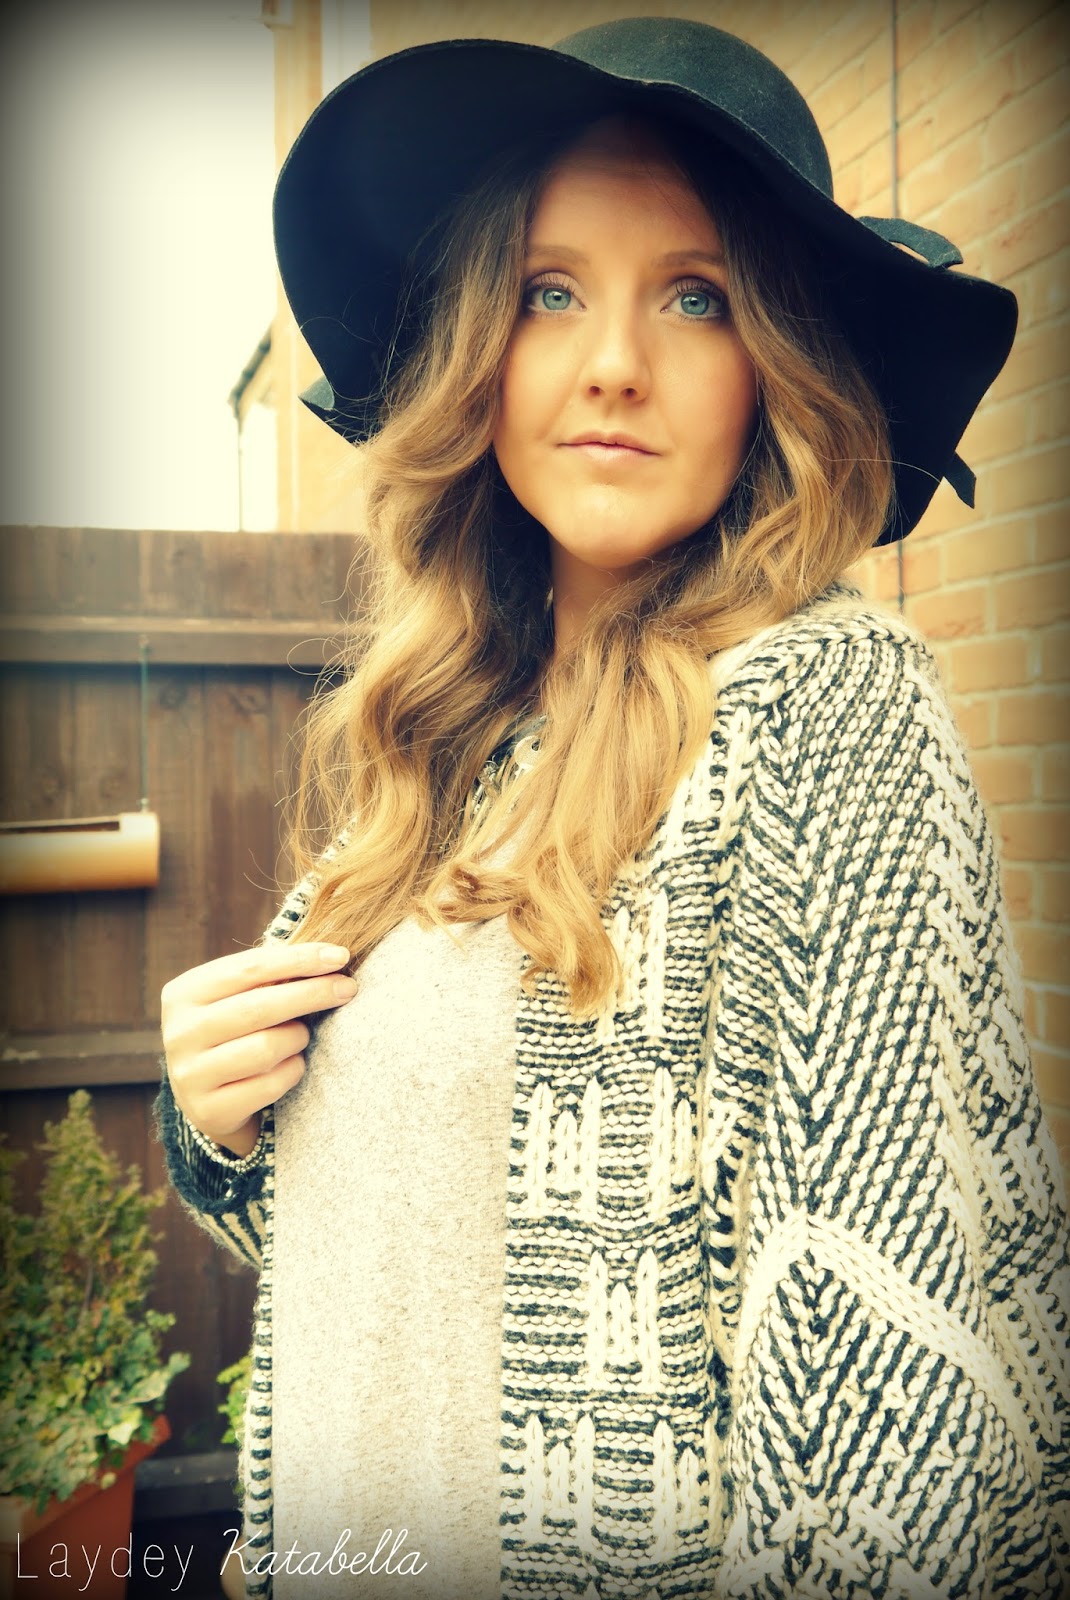 photo of eBay floppy hat, topshop leggings, primark oversized cardigan, H&M grey t-shirt, New look leather ankle boots